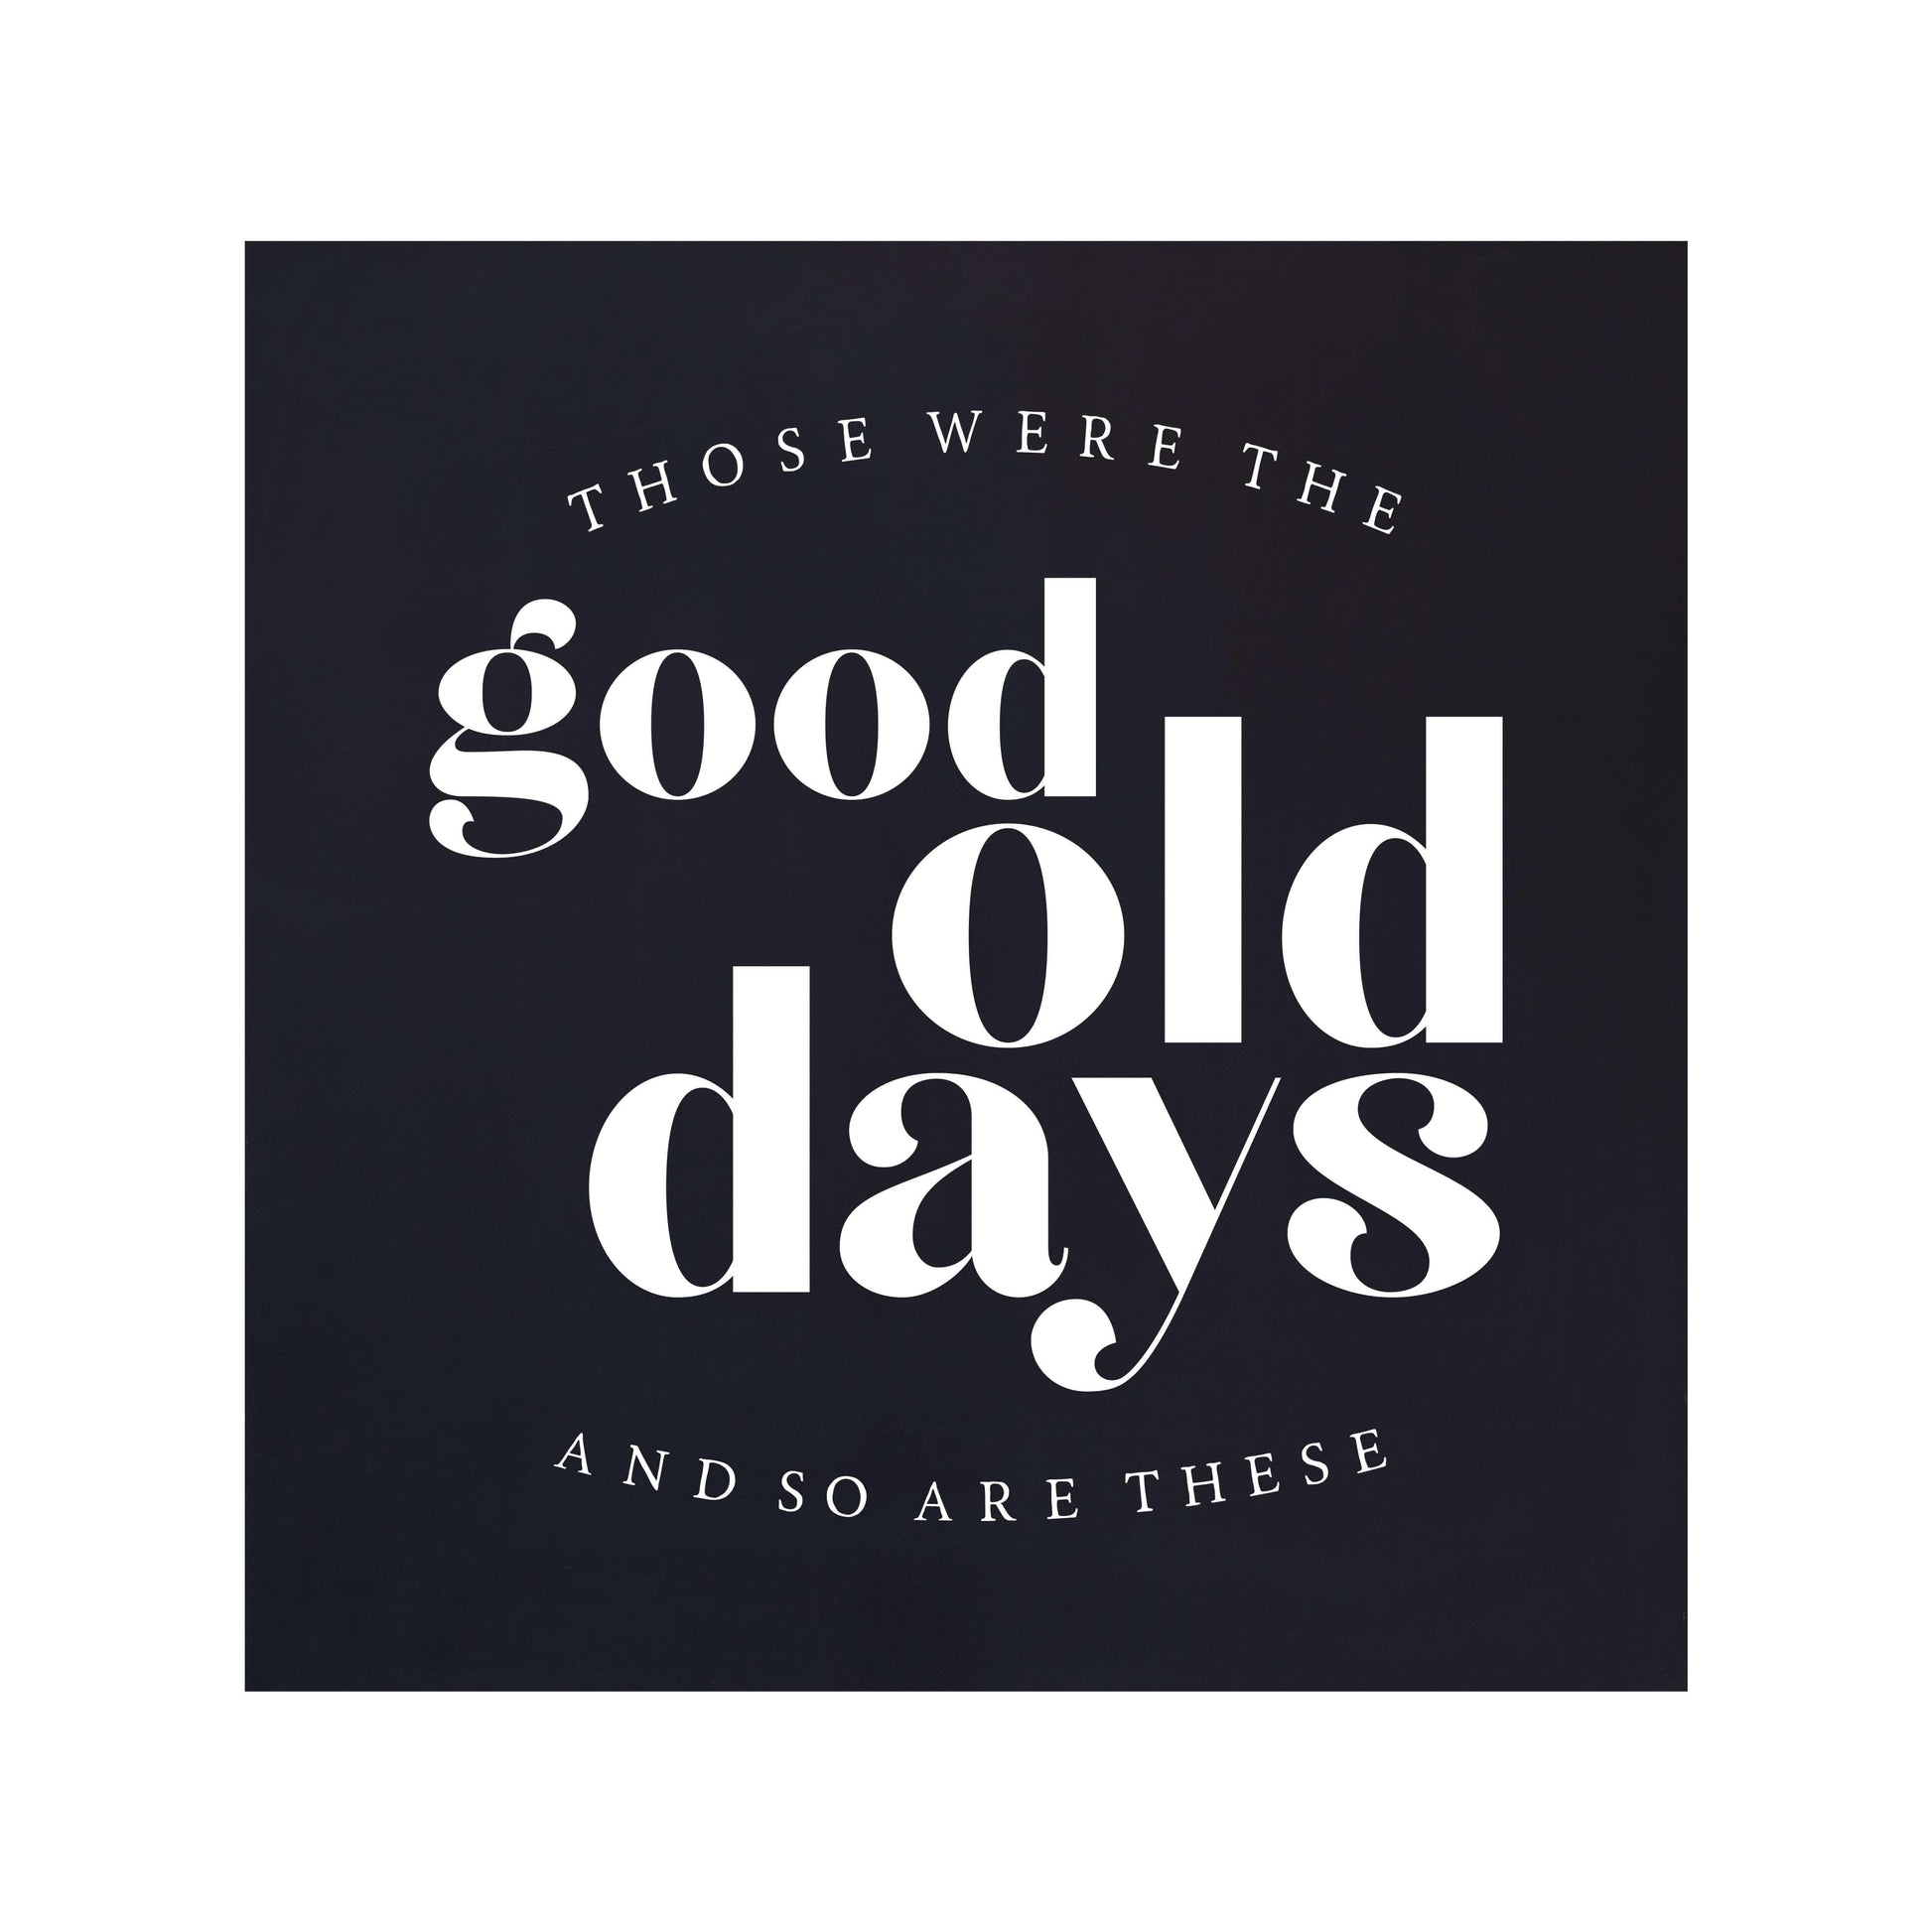 Joyfully Said Wooden signs 12 inches x 12 inches / Black-White Text / Light brown stain Those Were the Good Old Days